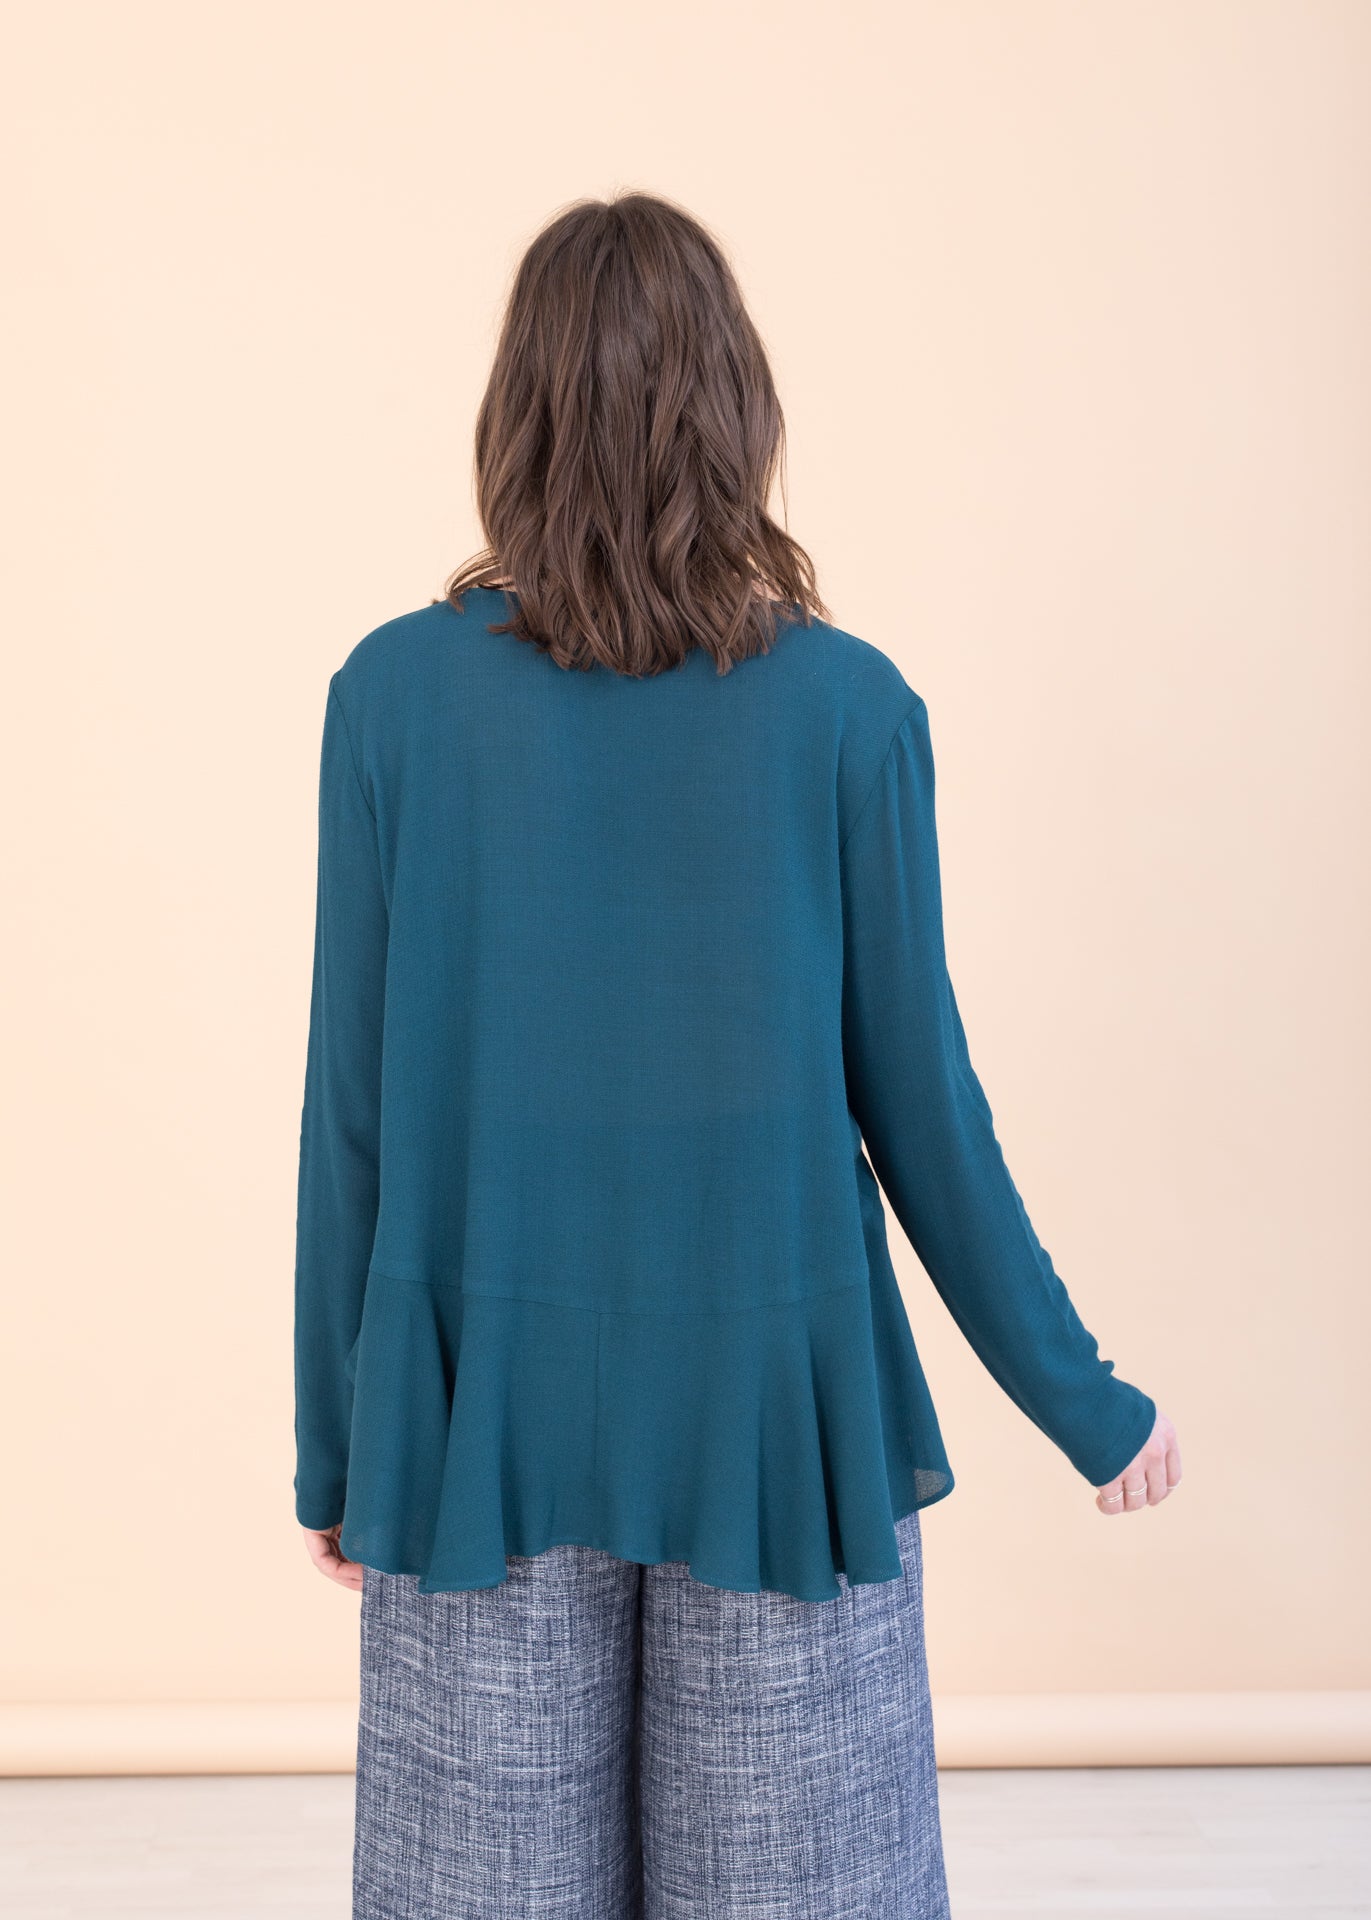 Midnight – Top in Teal